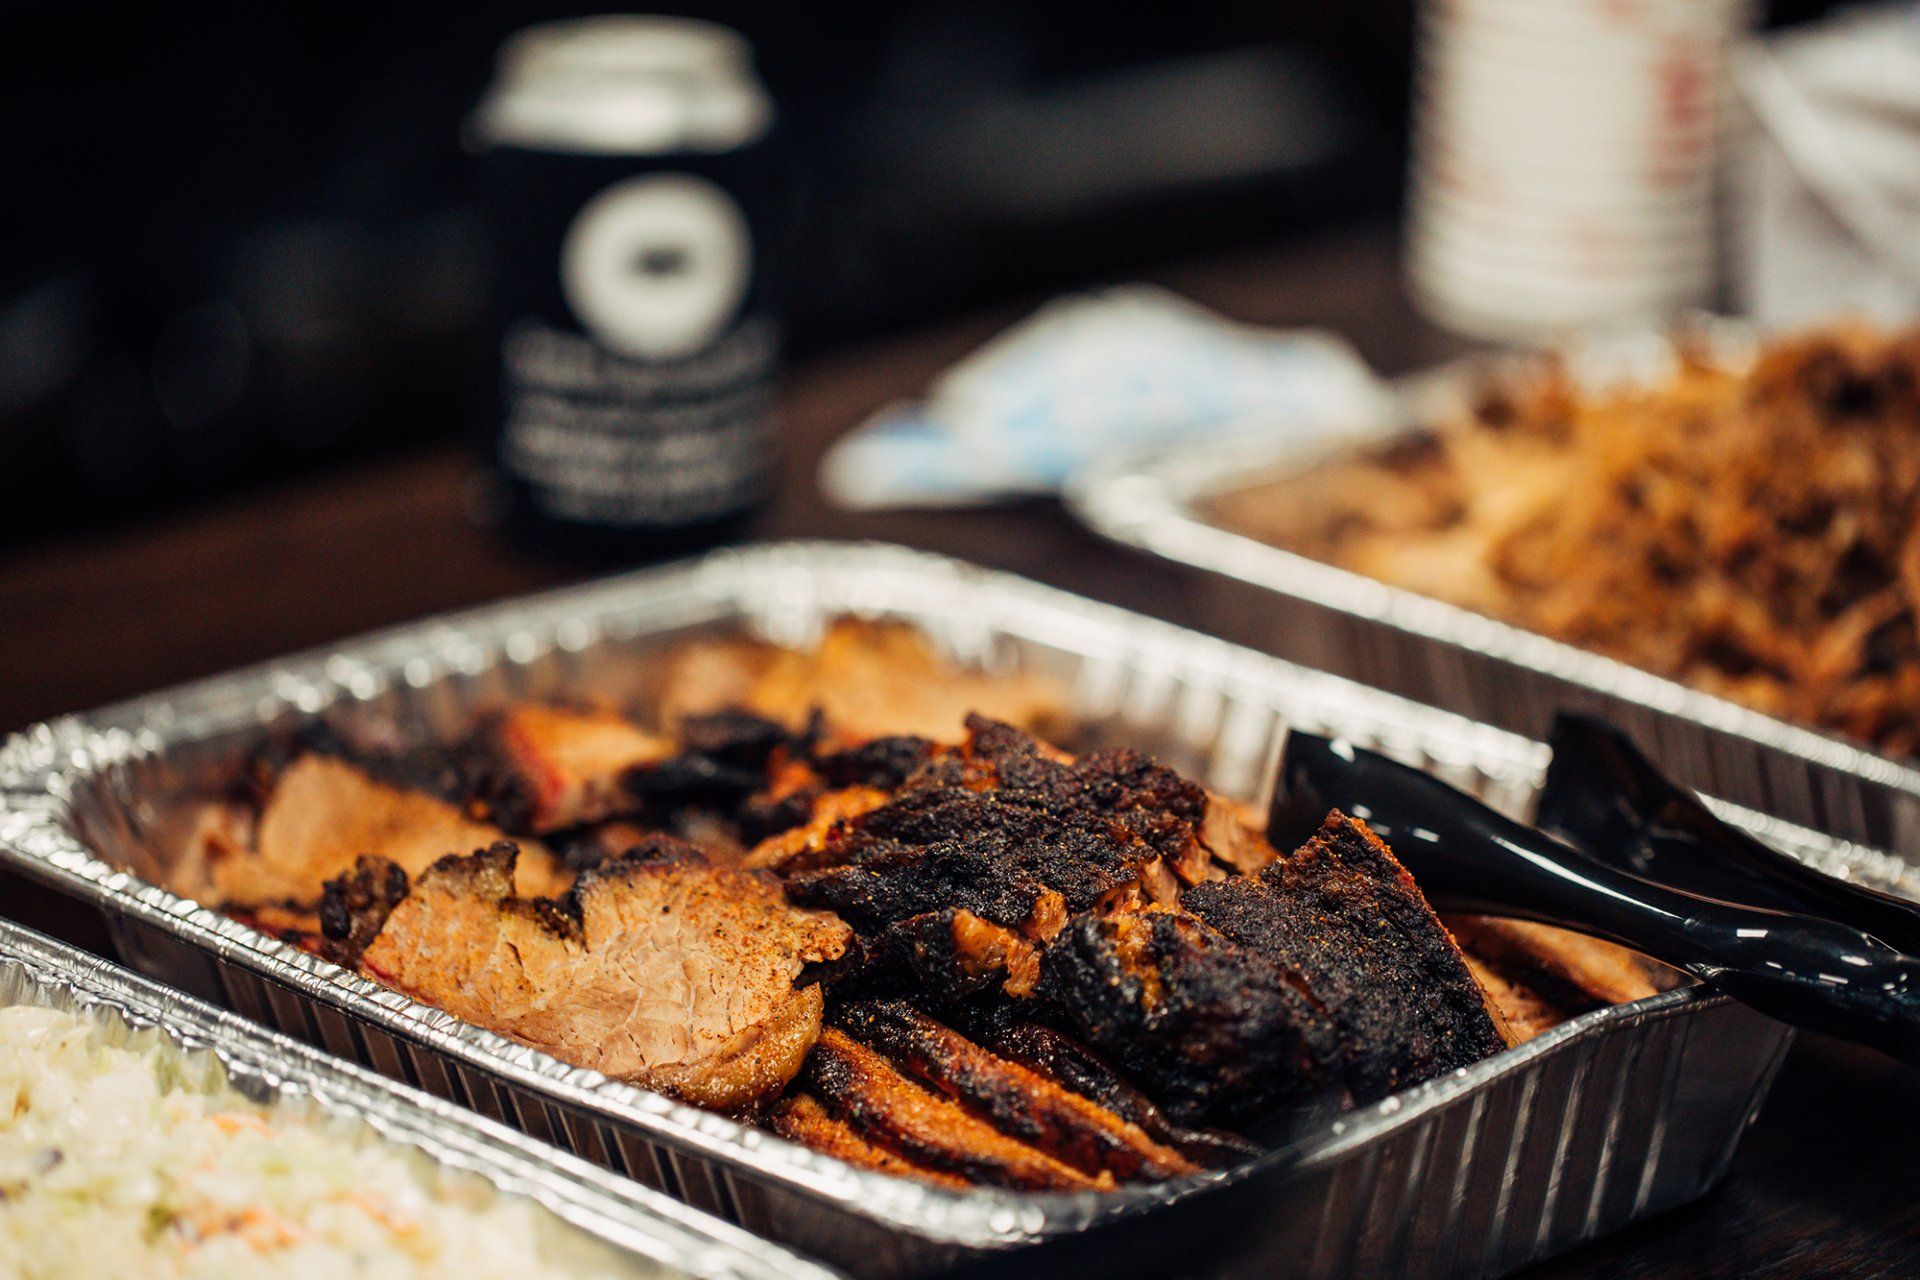 Give Your Guests a Real Treat With Barbecue Catering From Sweet Smoke BBQ in Jefferson City, MO.